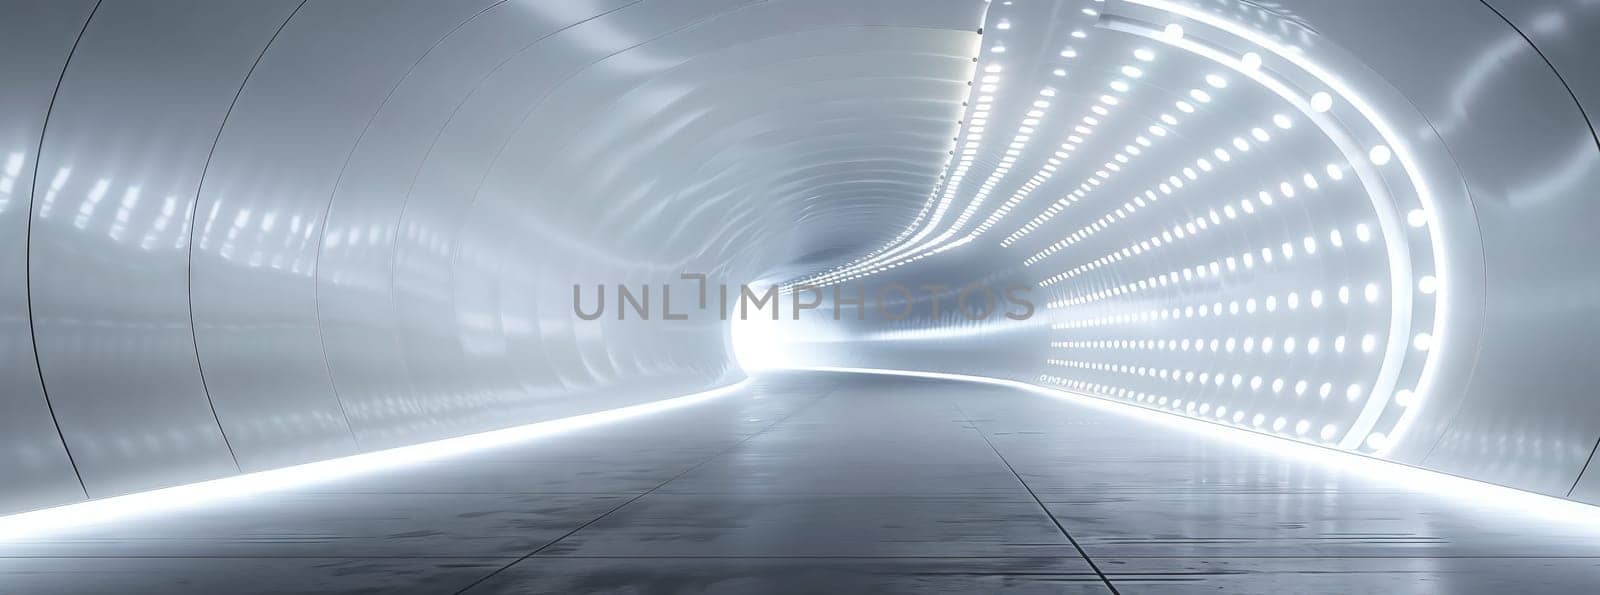 A futuristic tunnel illuminated with automotive lighting emitting electric blue hues and lens flare. The colors create a mesmerizing effect resembling a meteorological phenomenon